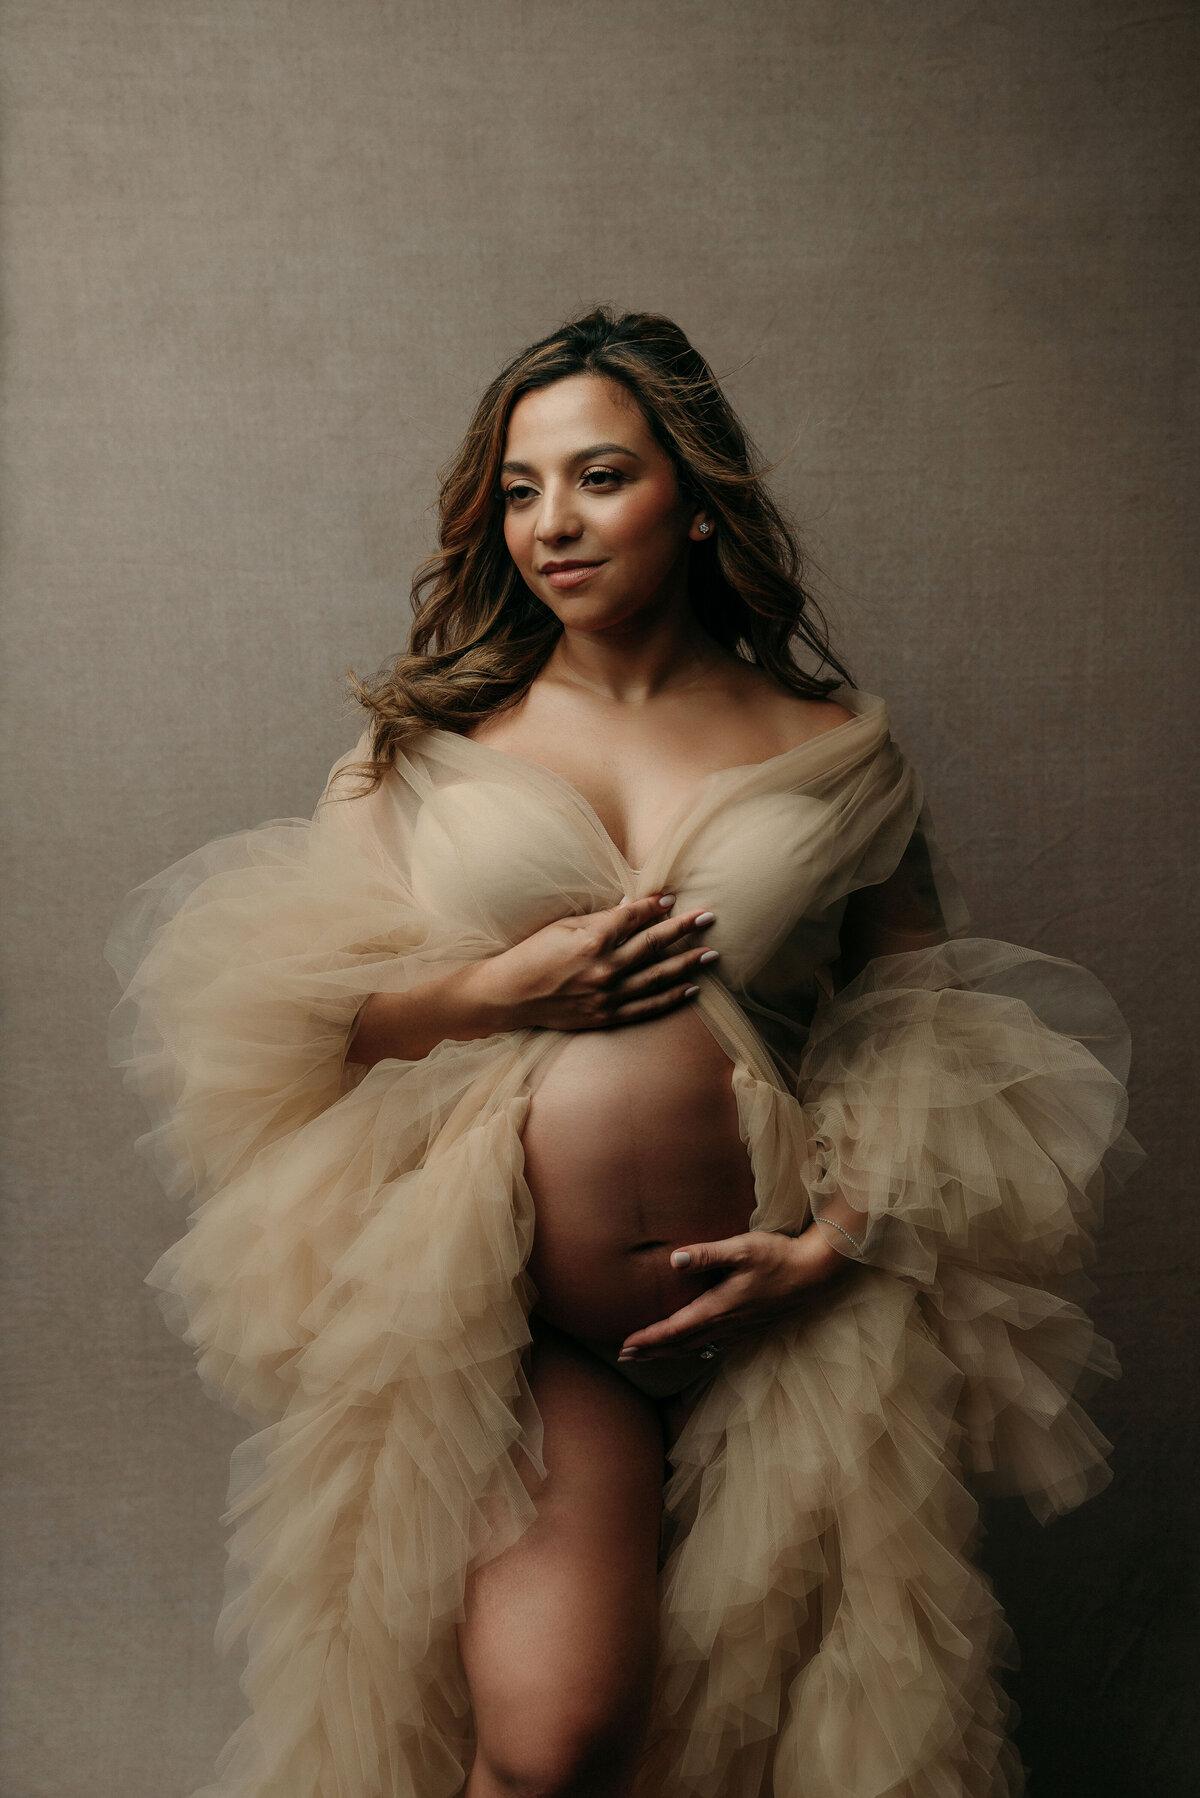 Pregnant mom wearing cream tulle dress open on belly holding baby bump on neutral backdrop